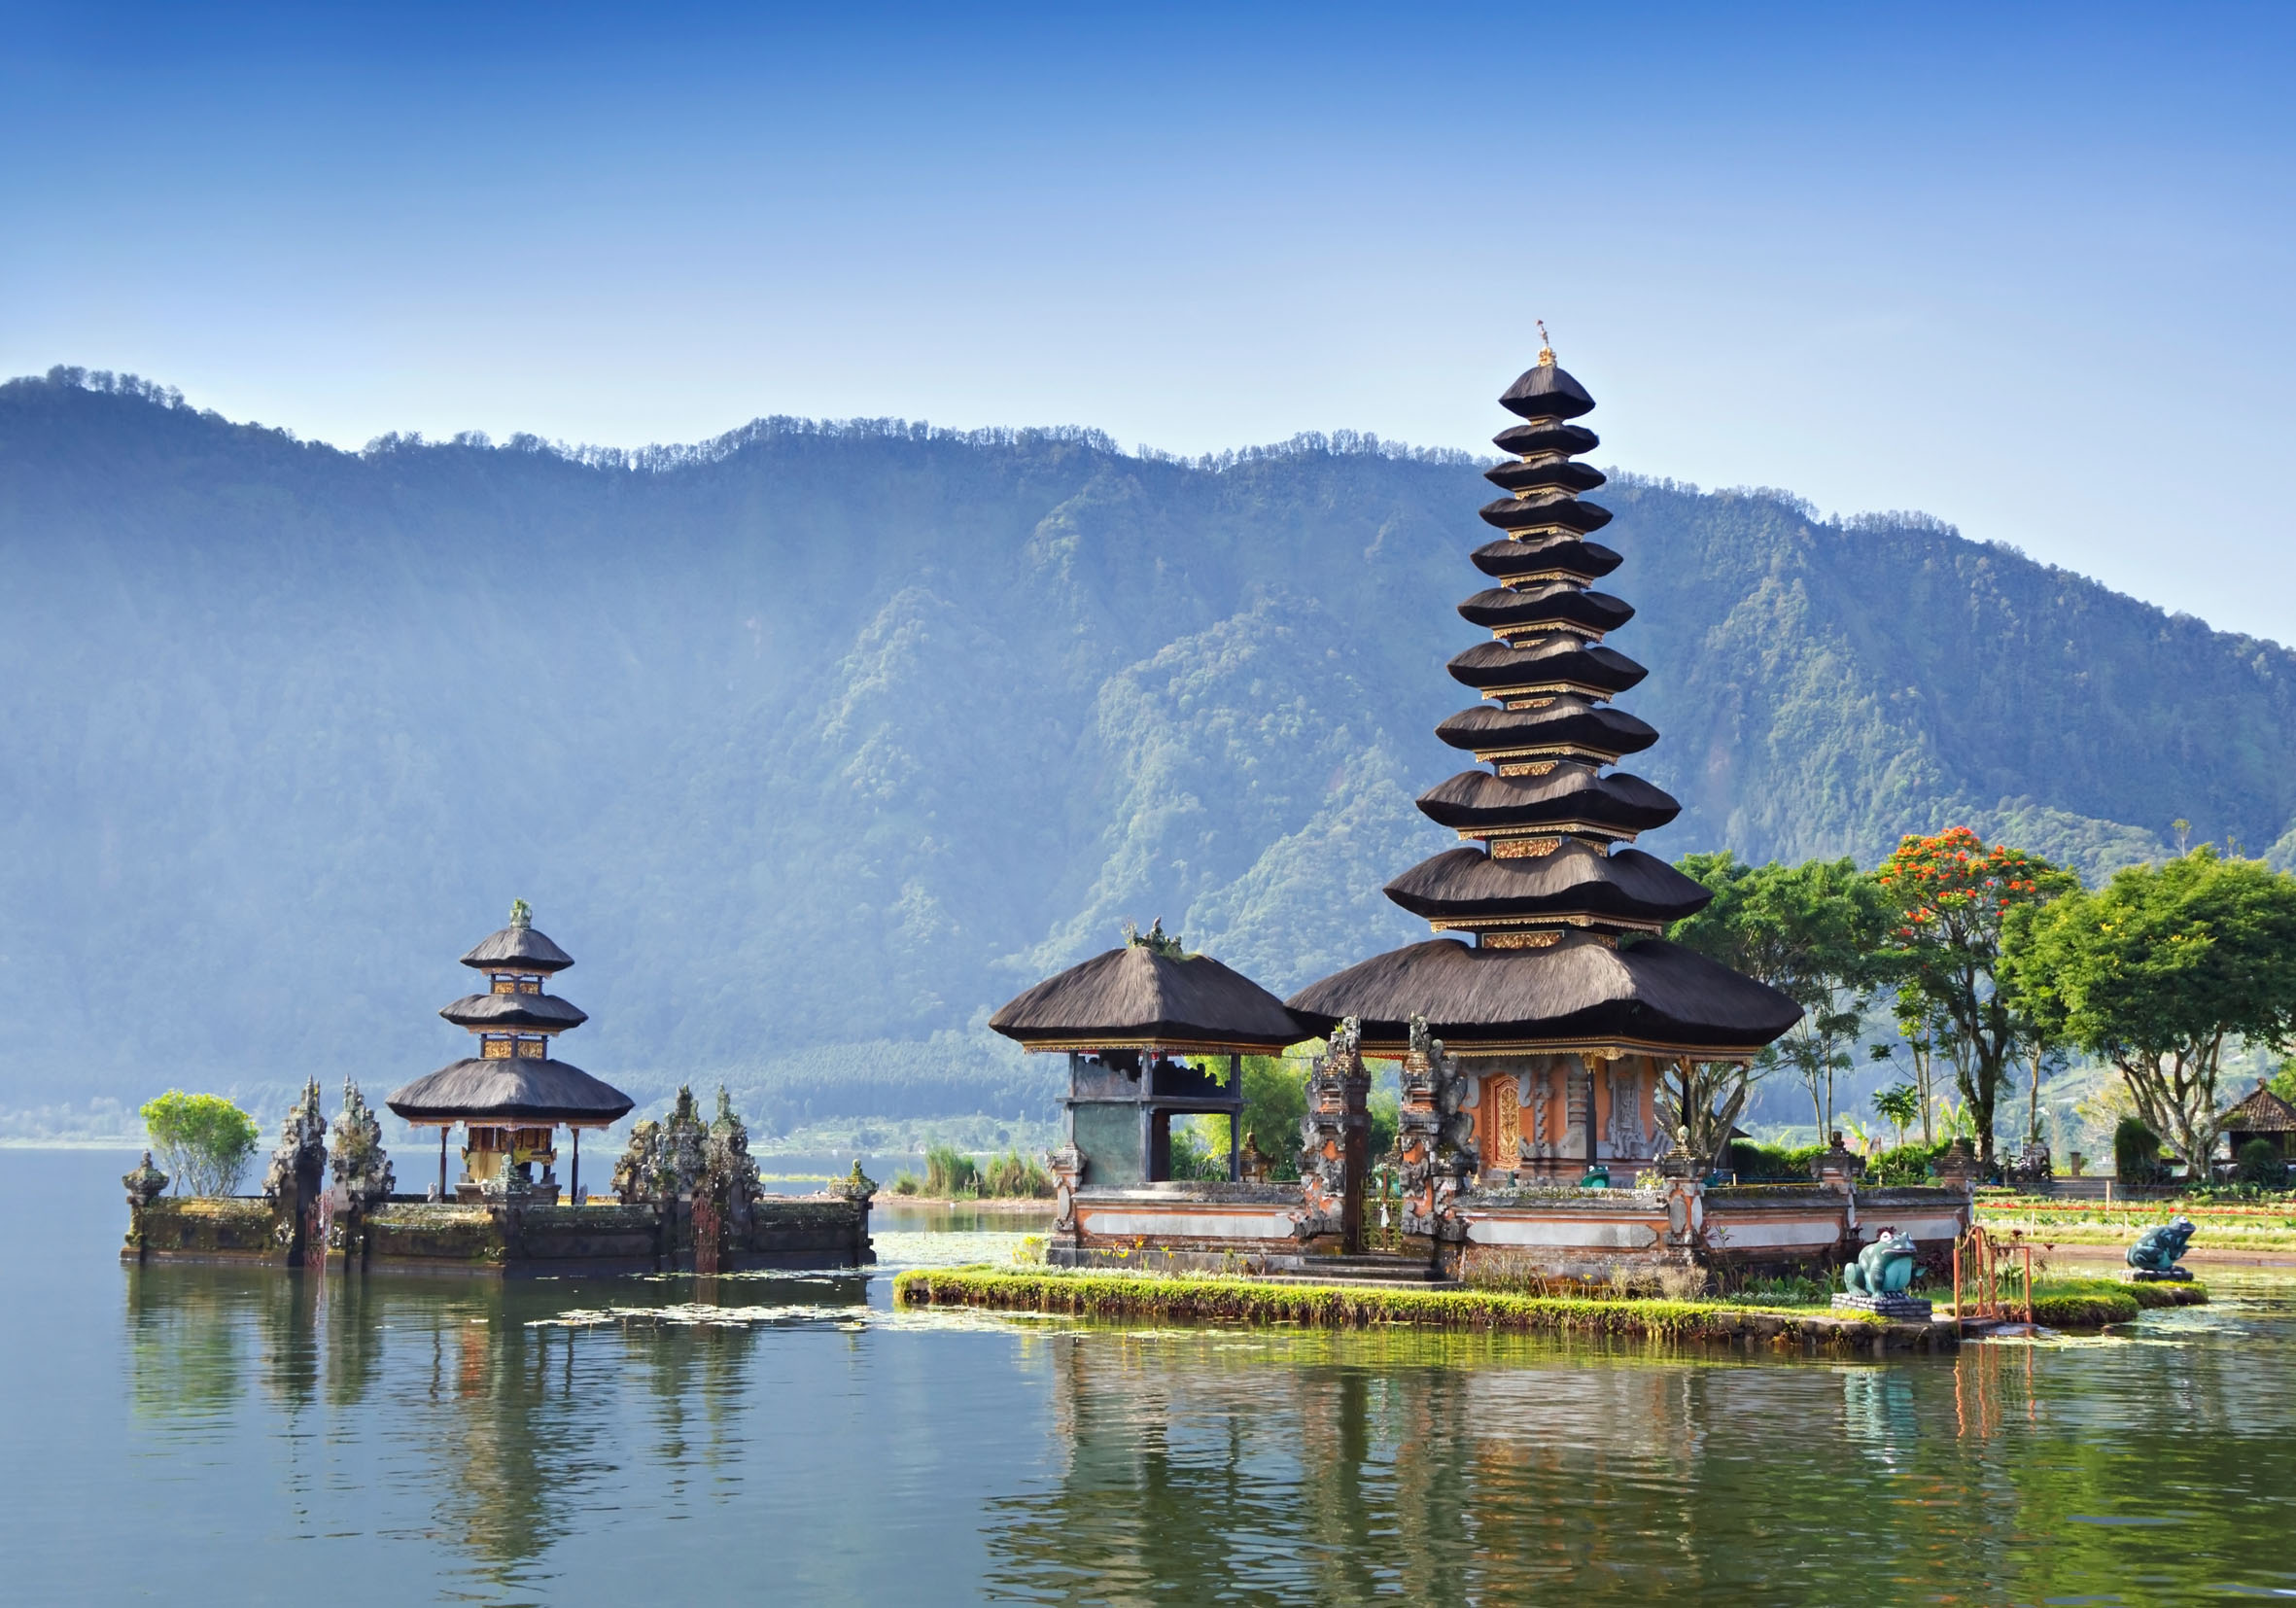 Interesting Activities To Do In Bali That Make Bali A Must-Visit Destination